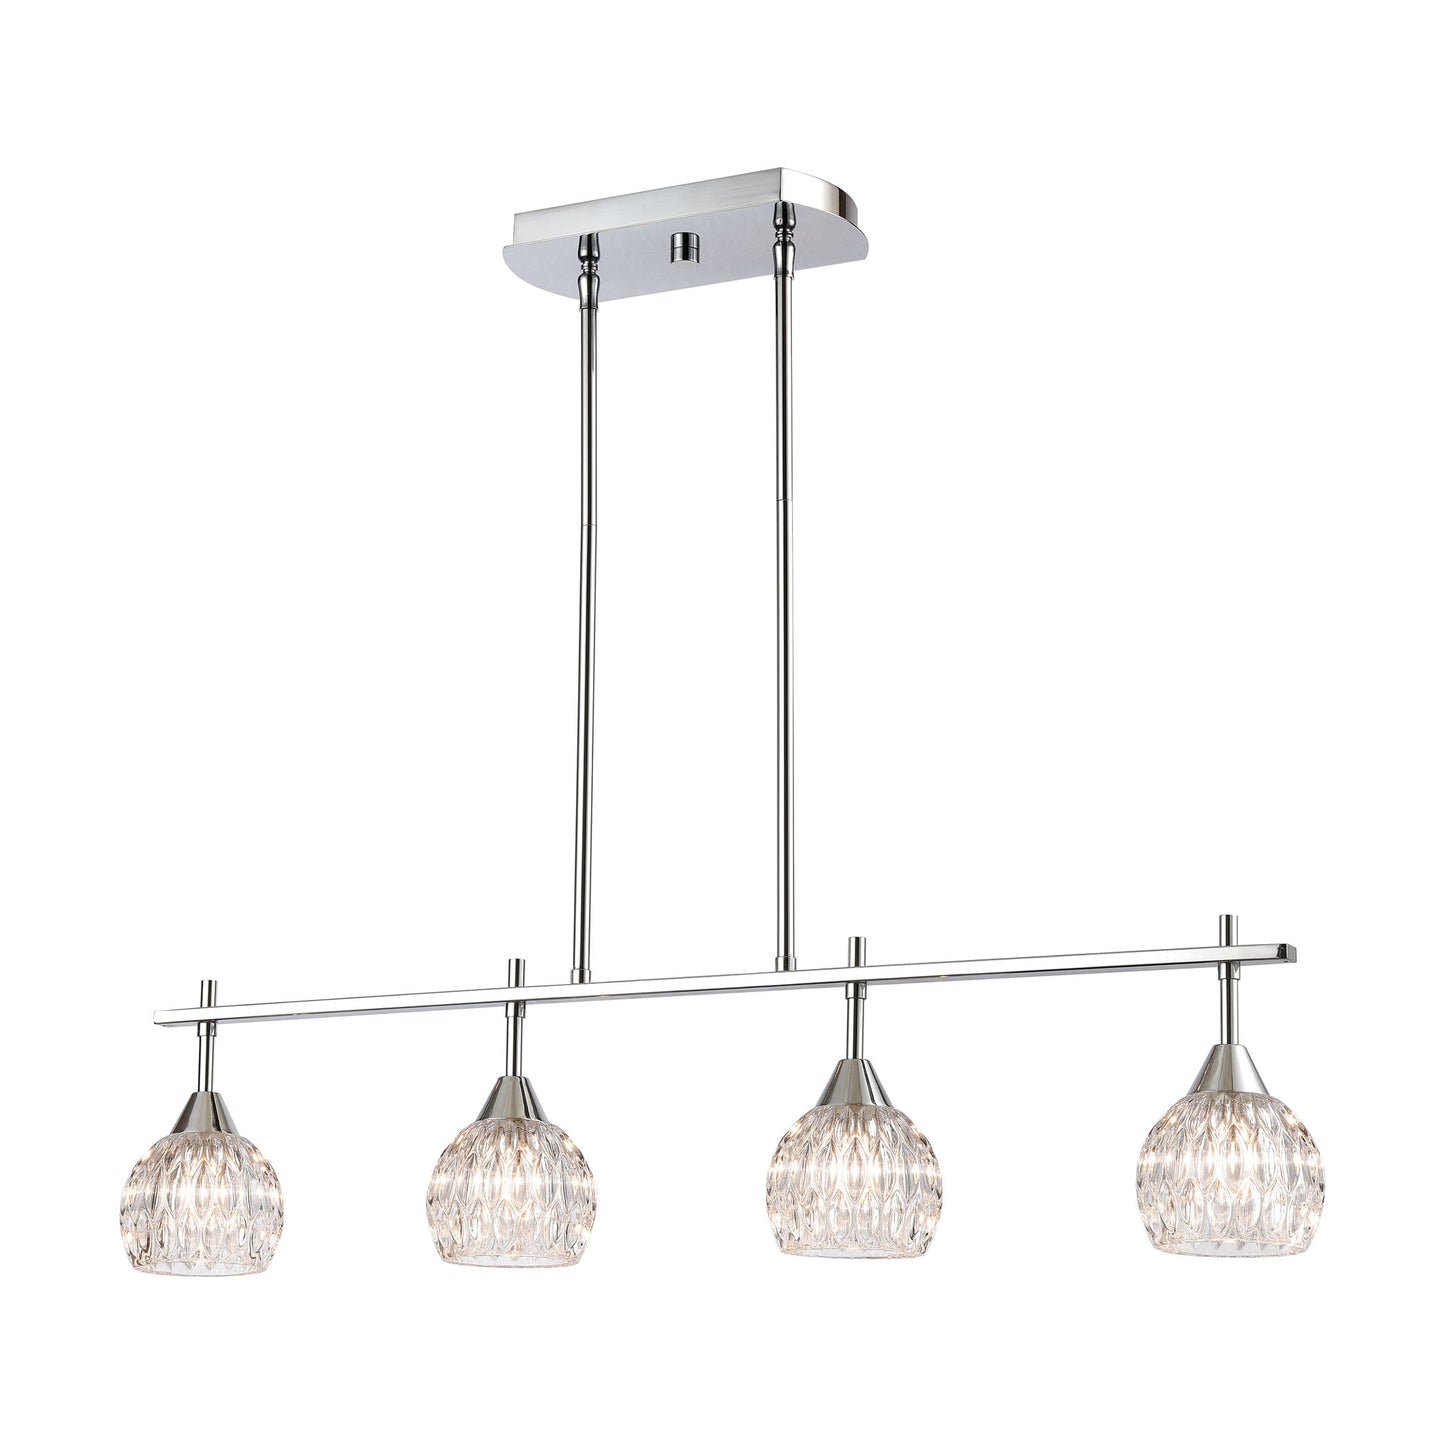 ELK Lighting 10825/4 - Kersey 34" Wide 4-Light Island Light in Polished Chrome with Clear Crystal